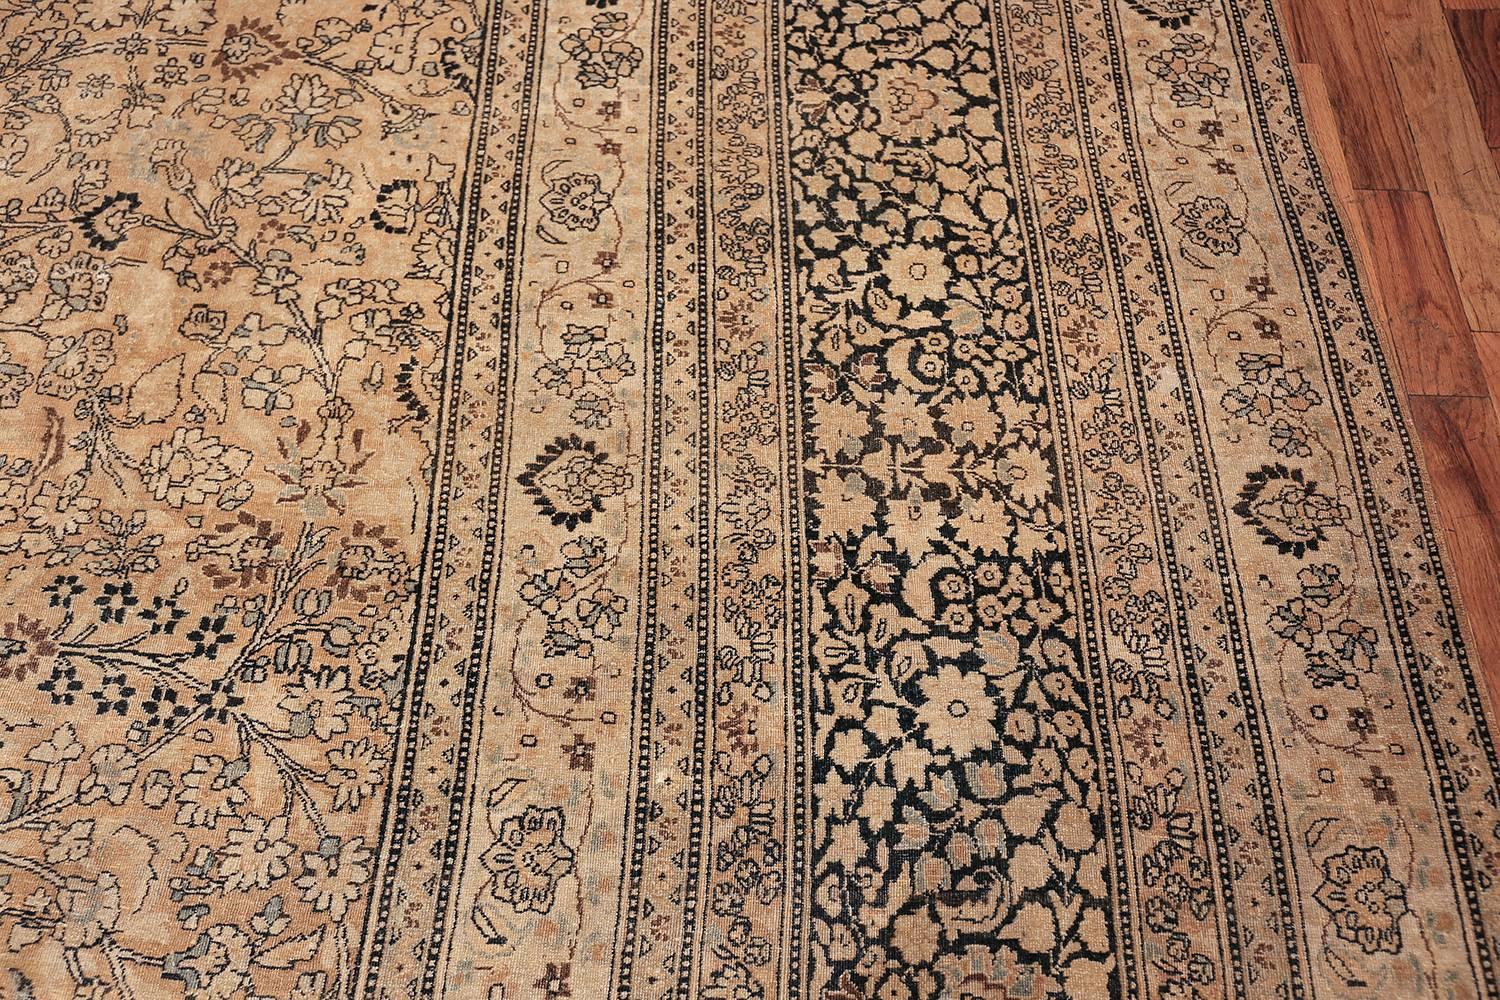 Hand-Knotted Antique Oversized Persian Tabriz Rug. Size: 15' 9